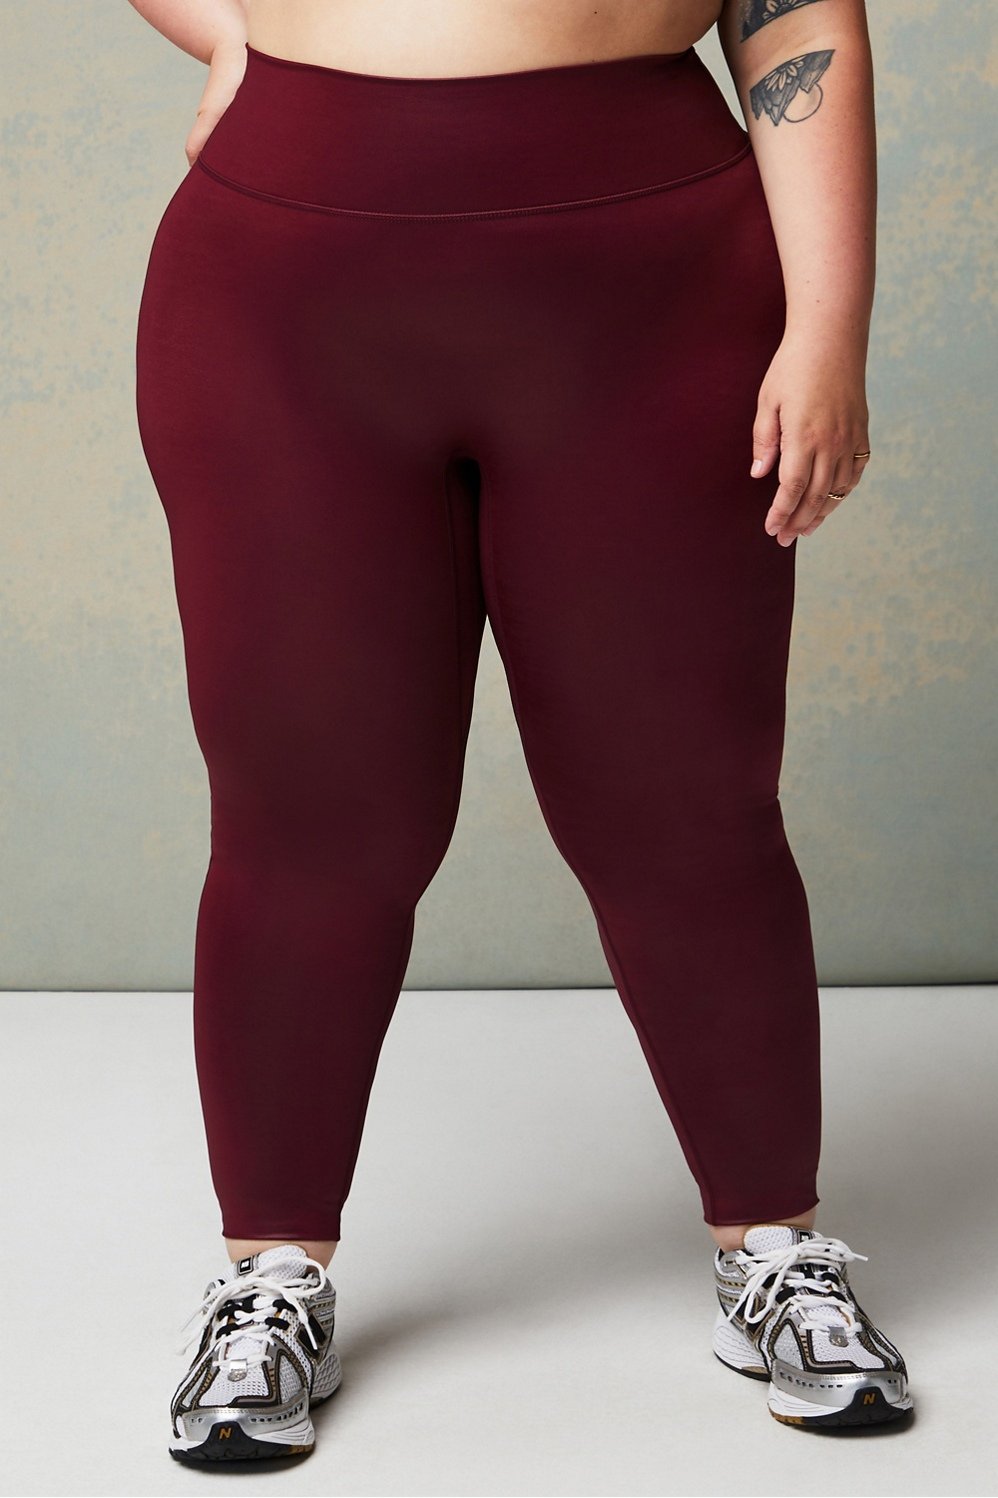 Fabletics Motion 365 Legging Size XS - $28 - From Shyane